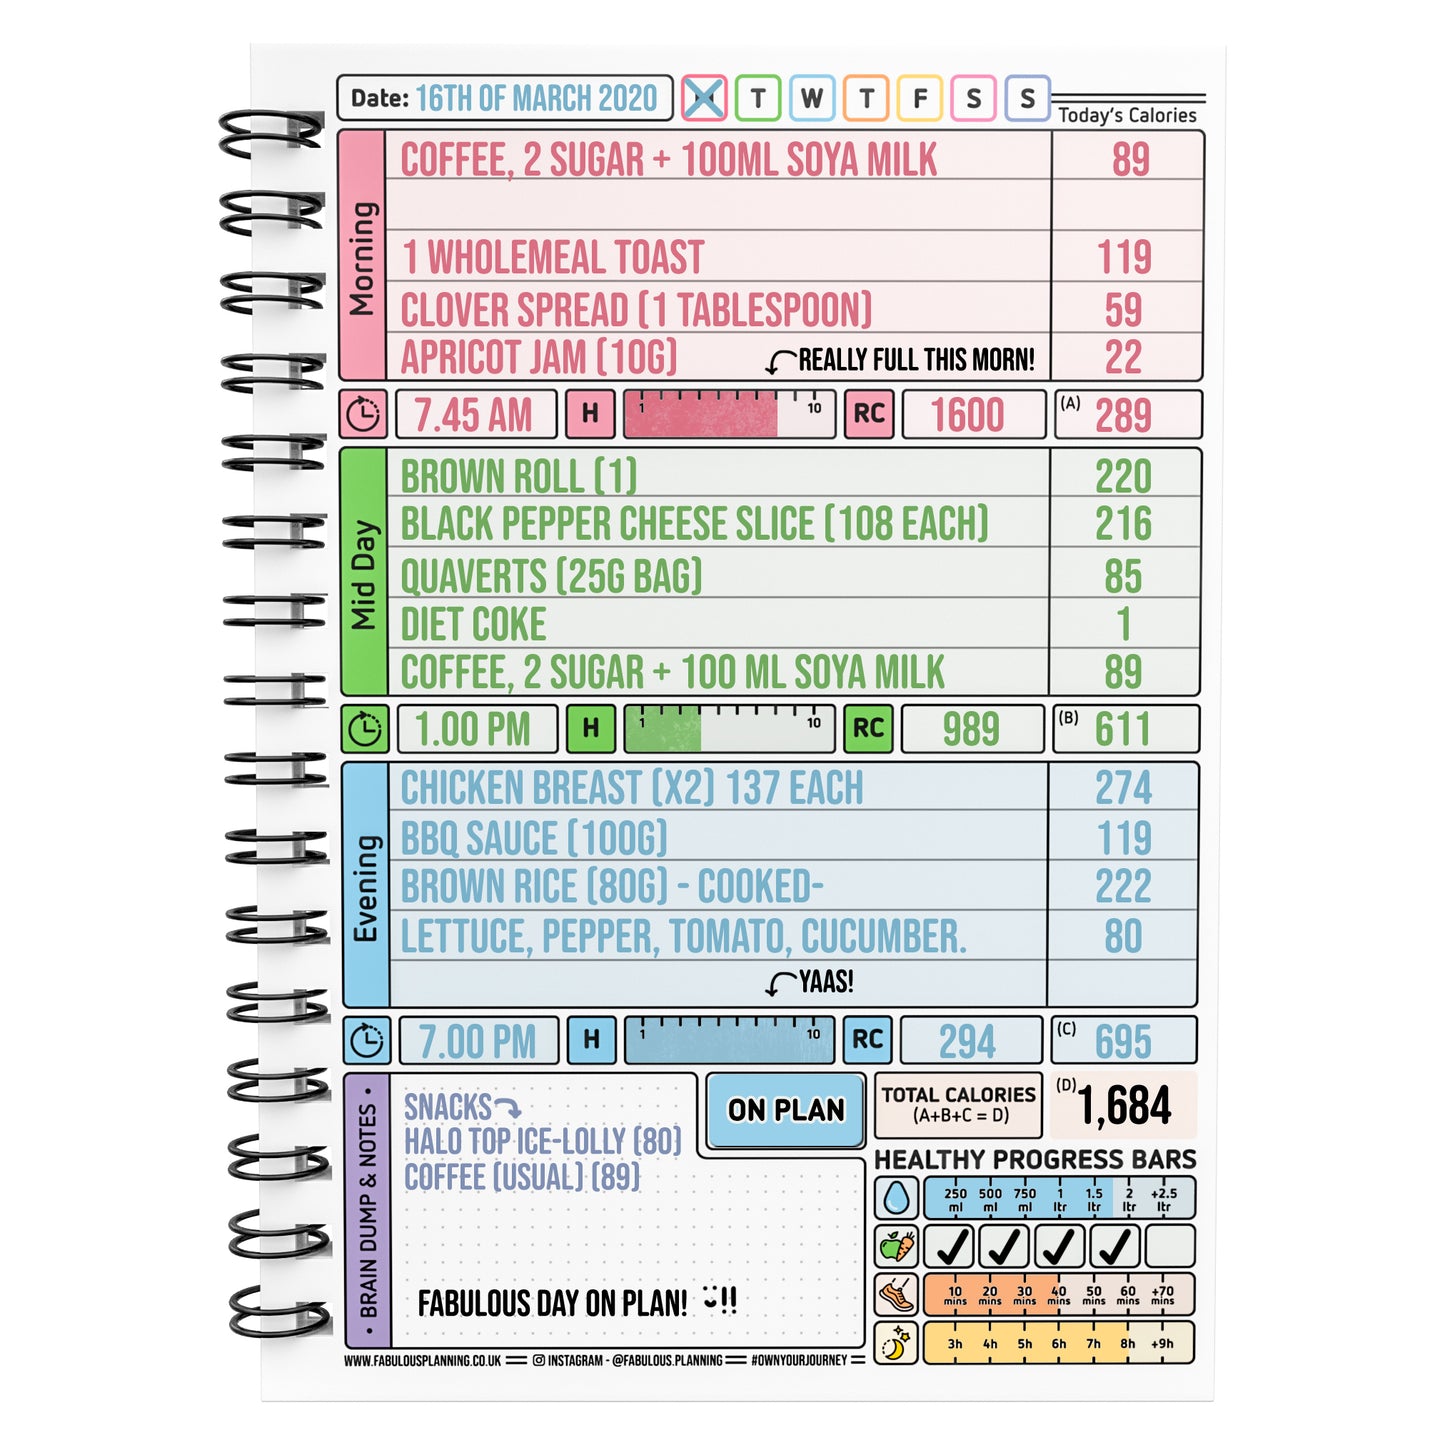 Food Diary - C40 - Calorie Counting